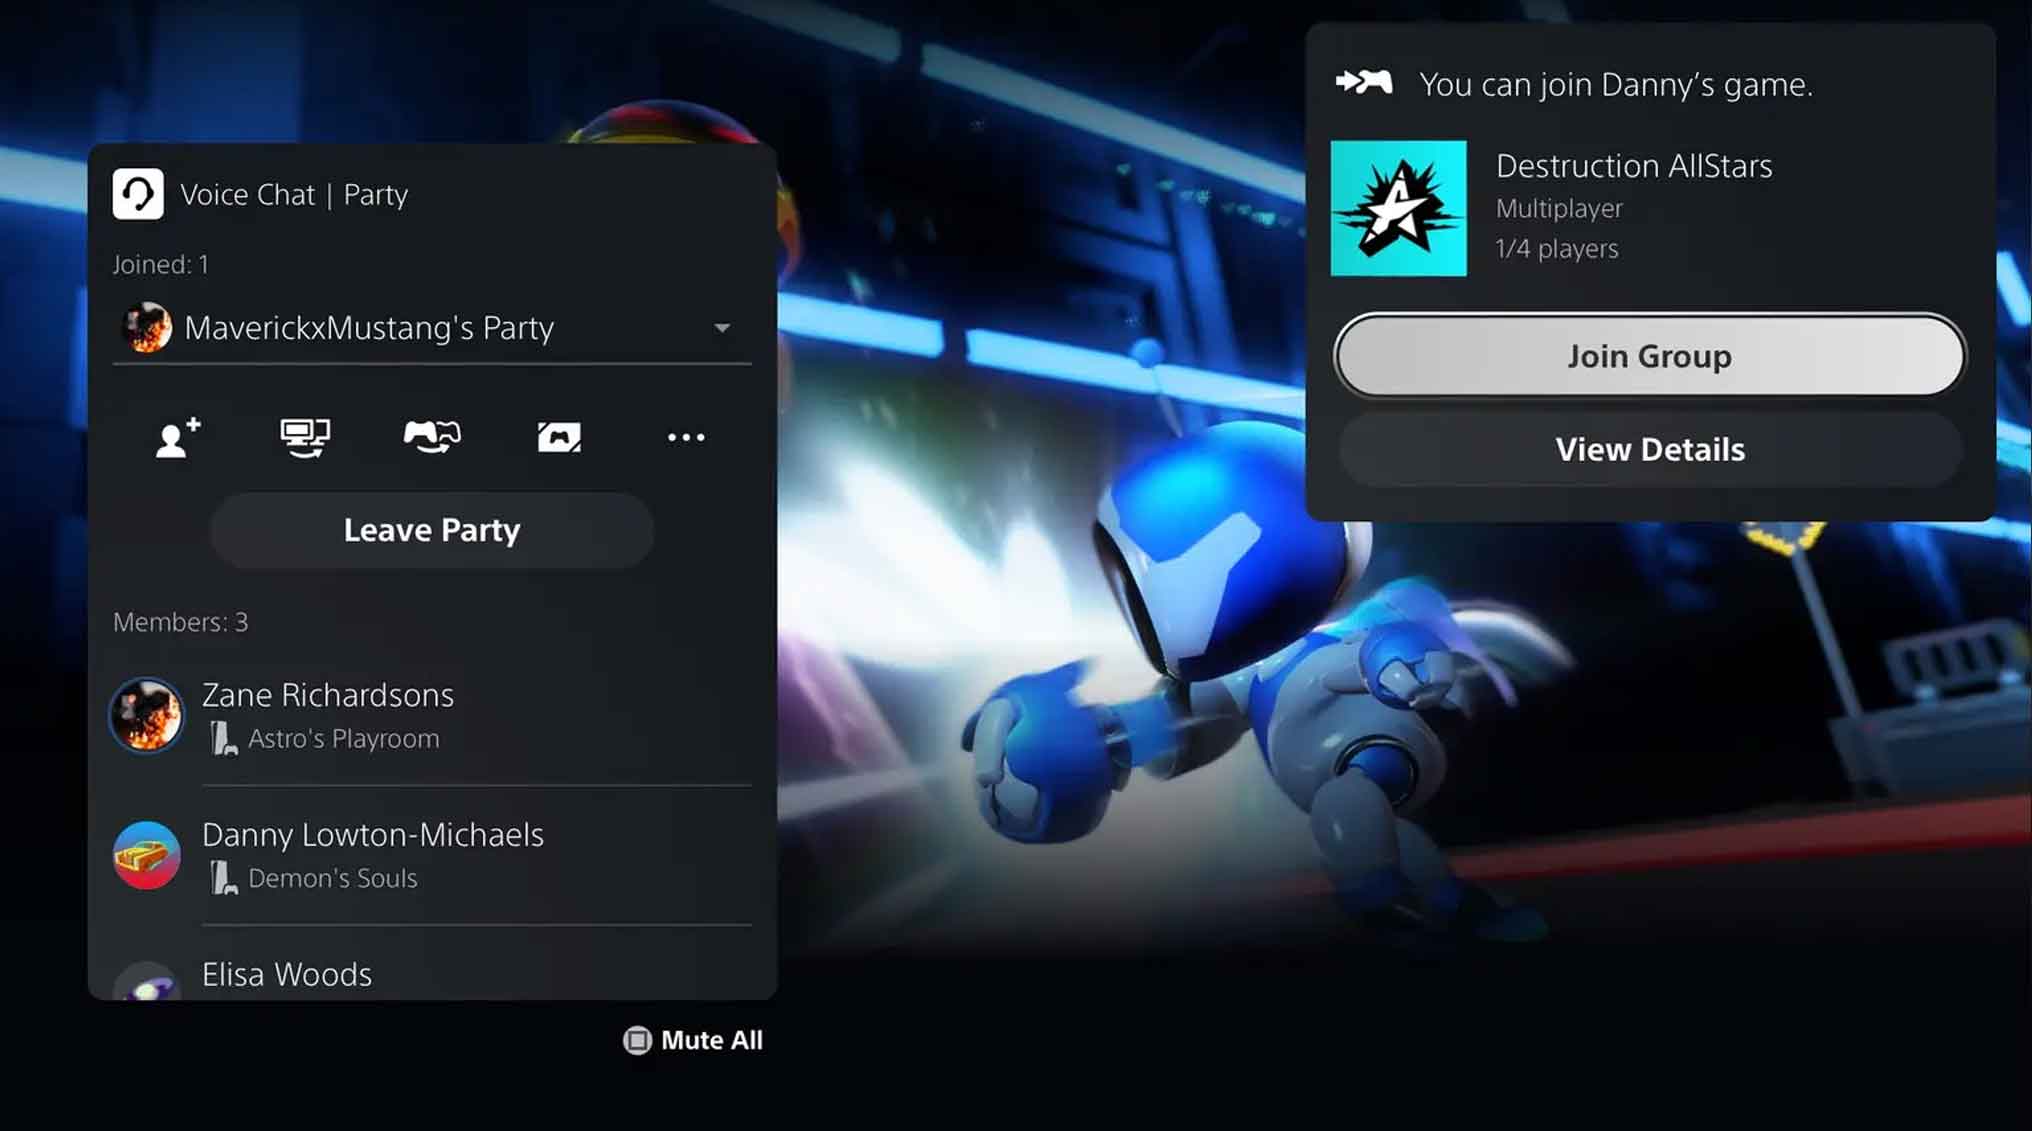 ps5 joinable game notifications 